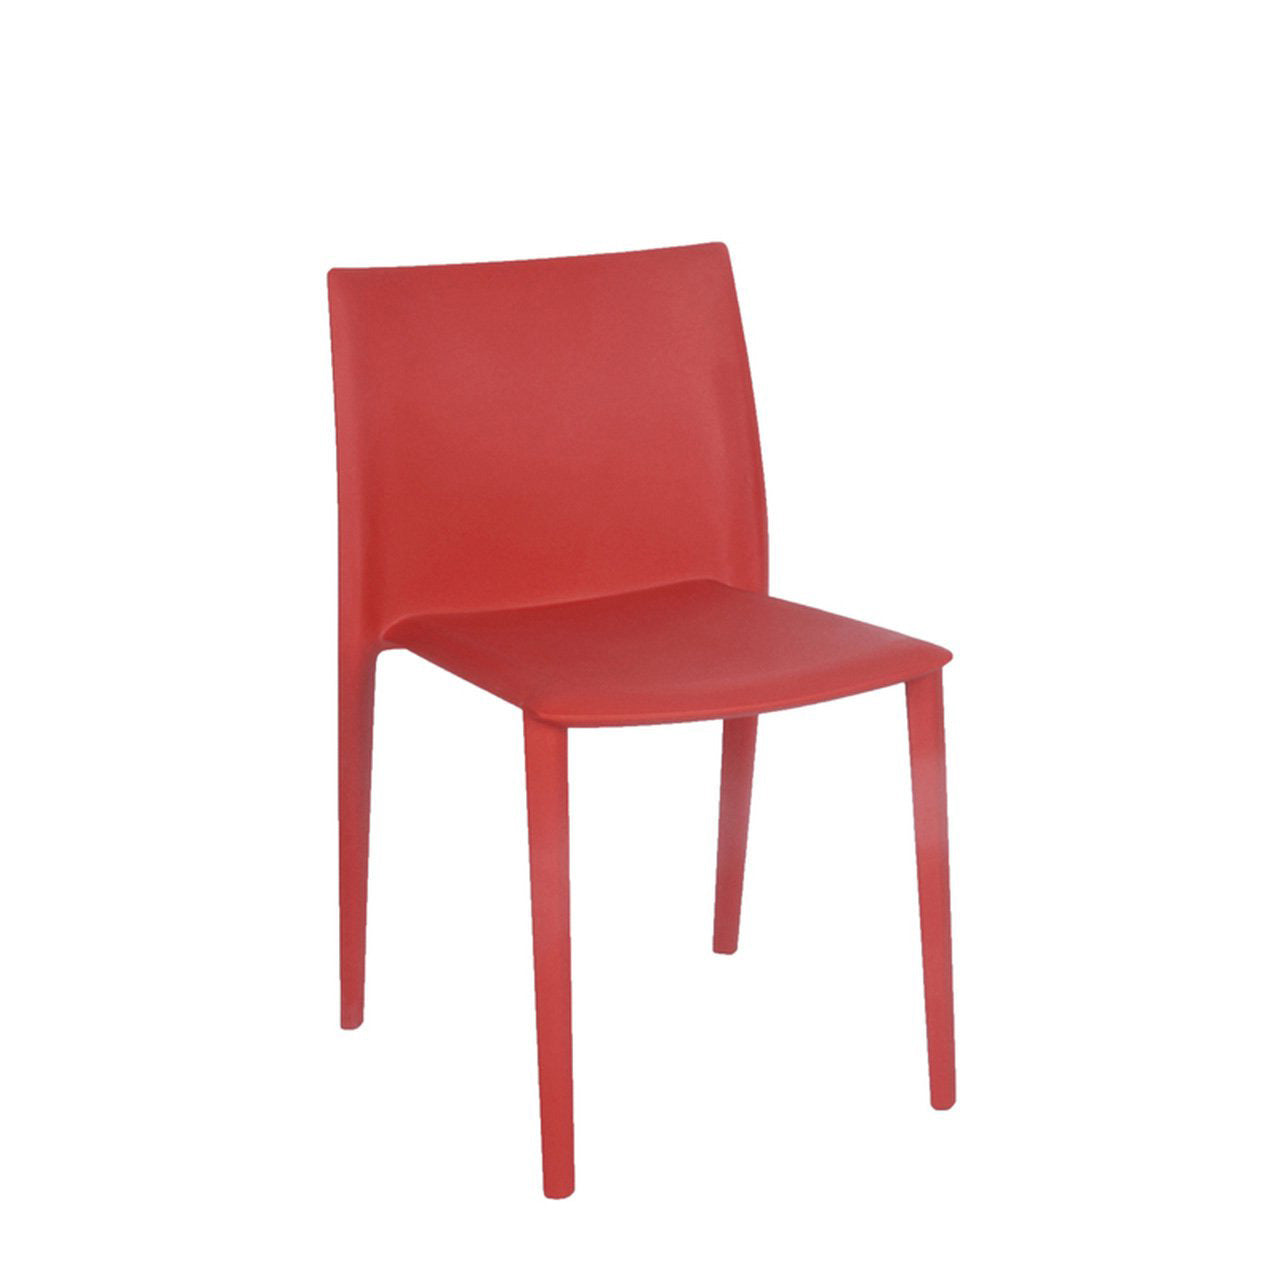 Load image into Gallery viewer, Sponge Chair - ContractWorld Furniture